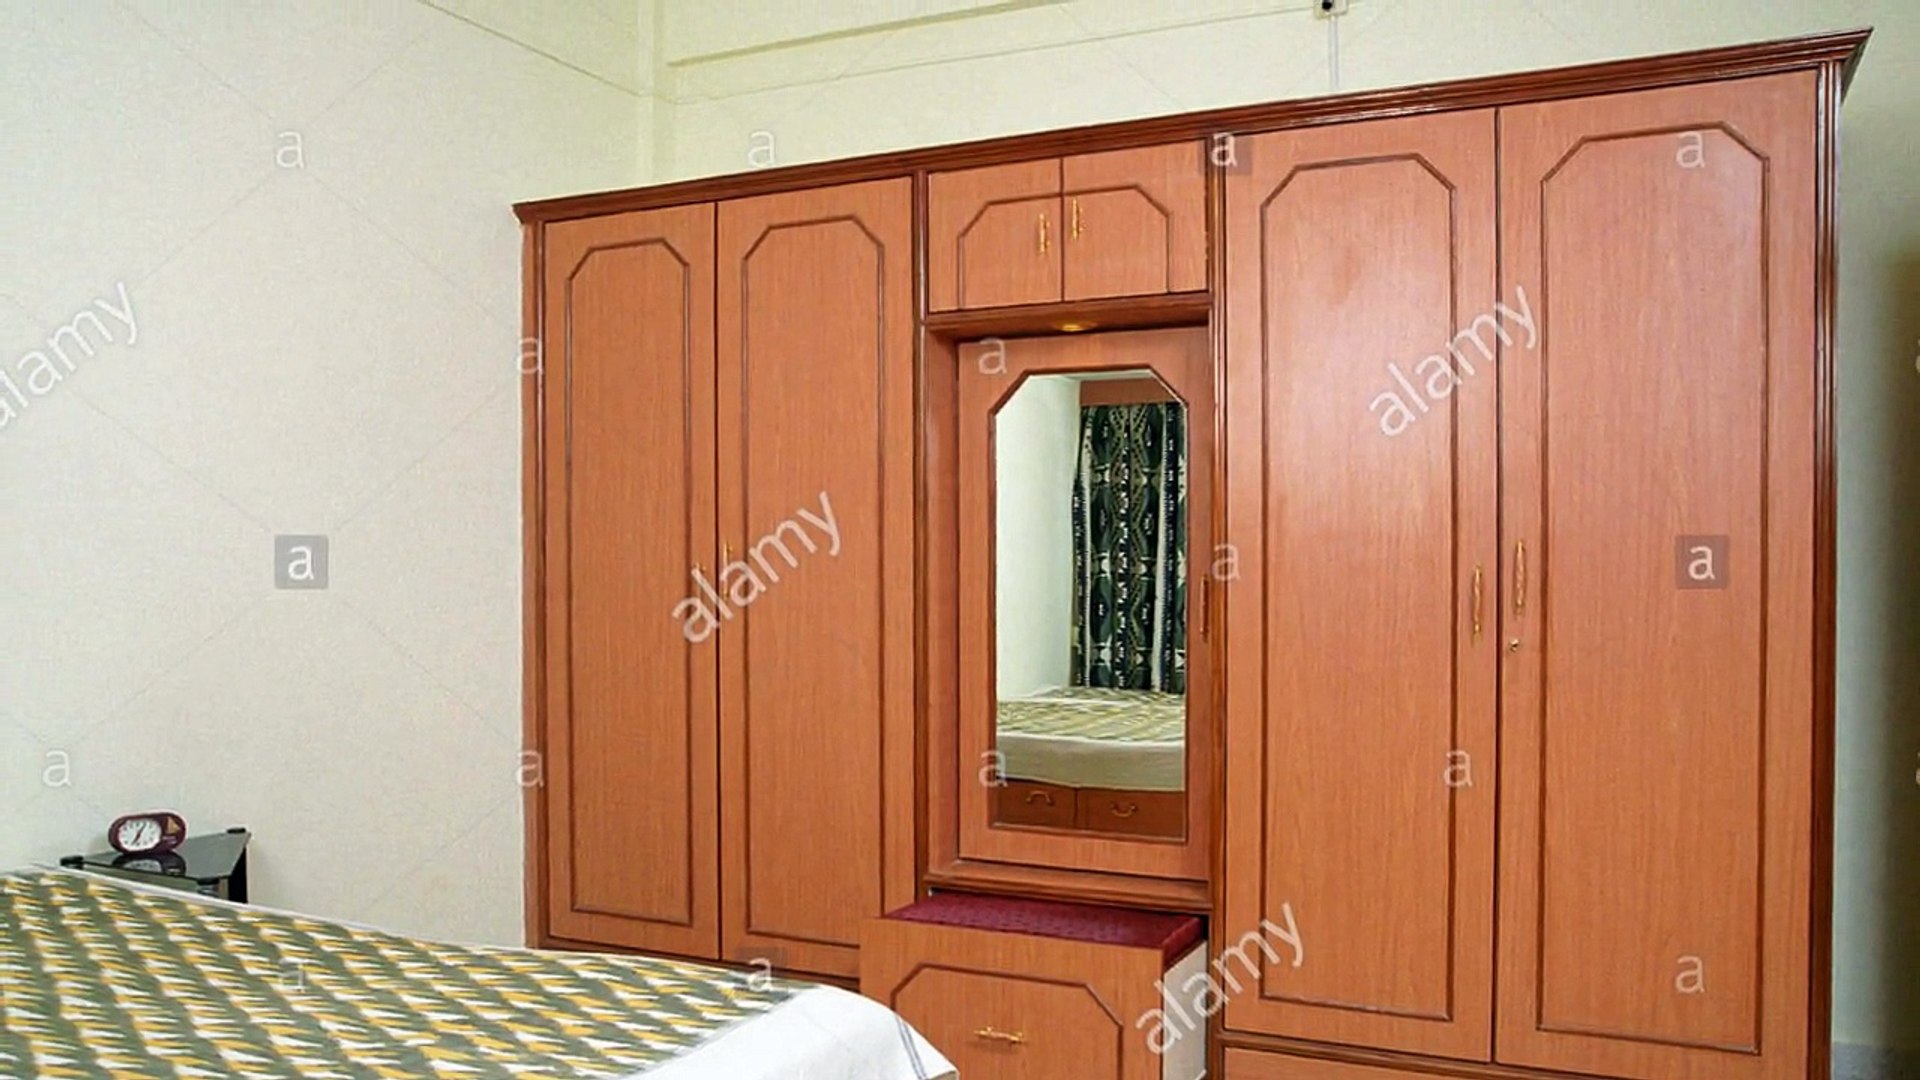 Wardrobe Design With Dressing Table India Designs Video Dailymotion,Pattern Minecraft Carpet Designs